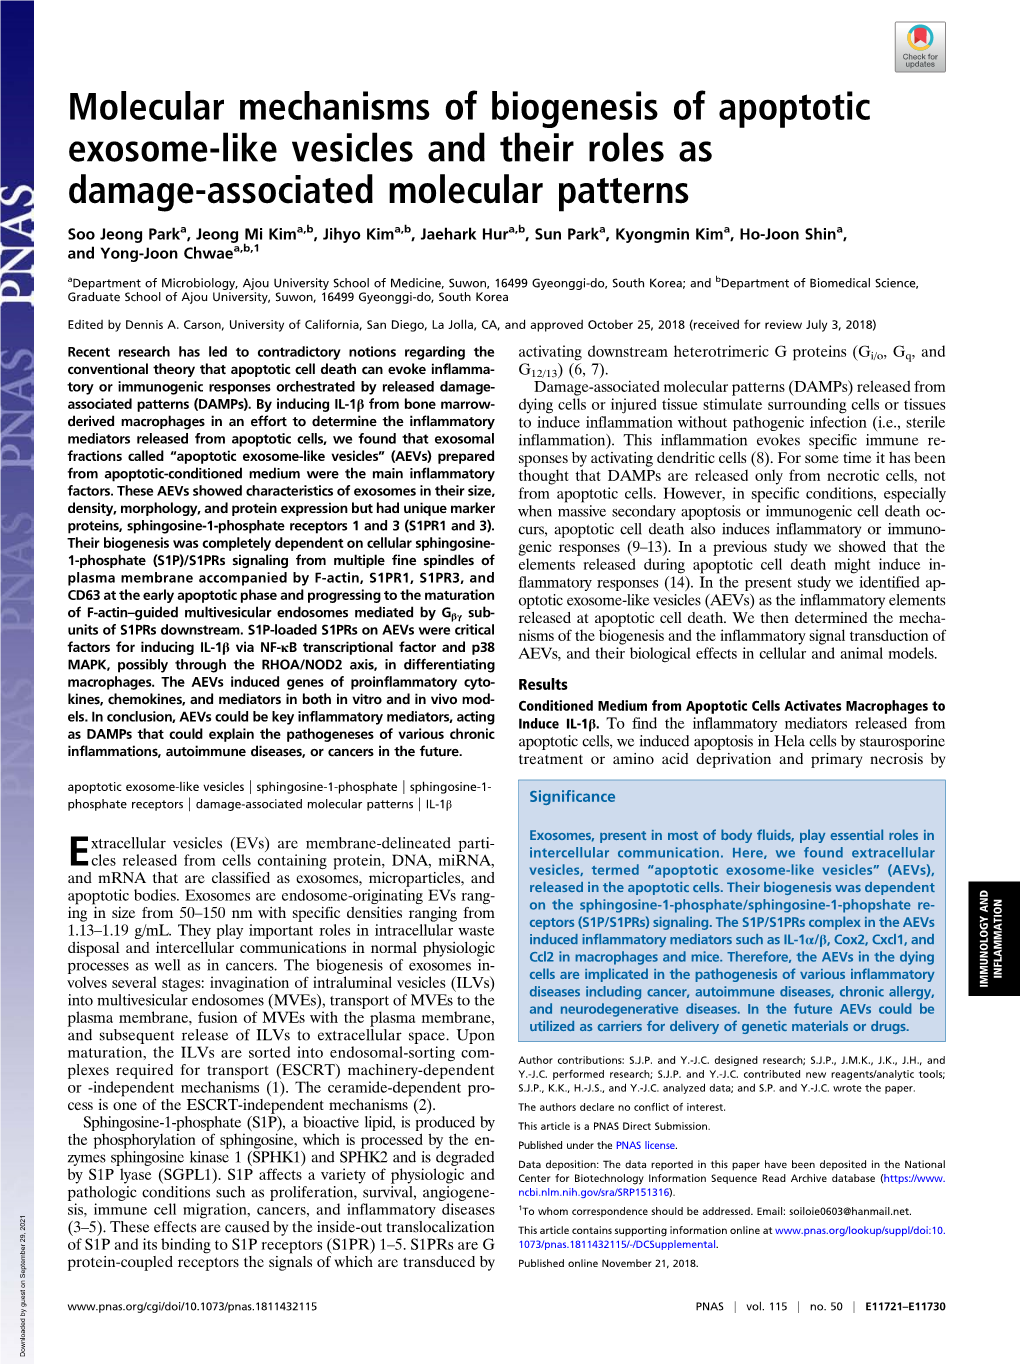 Molecular Mechanisms of Biogenesis of Apoptotic Exosome-Like Vesicles and Their Roles As Damage-Associated Molecular Patterns